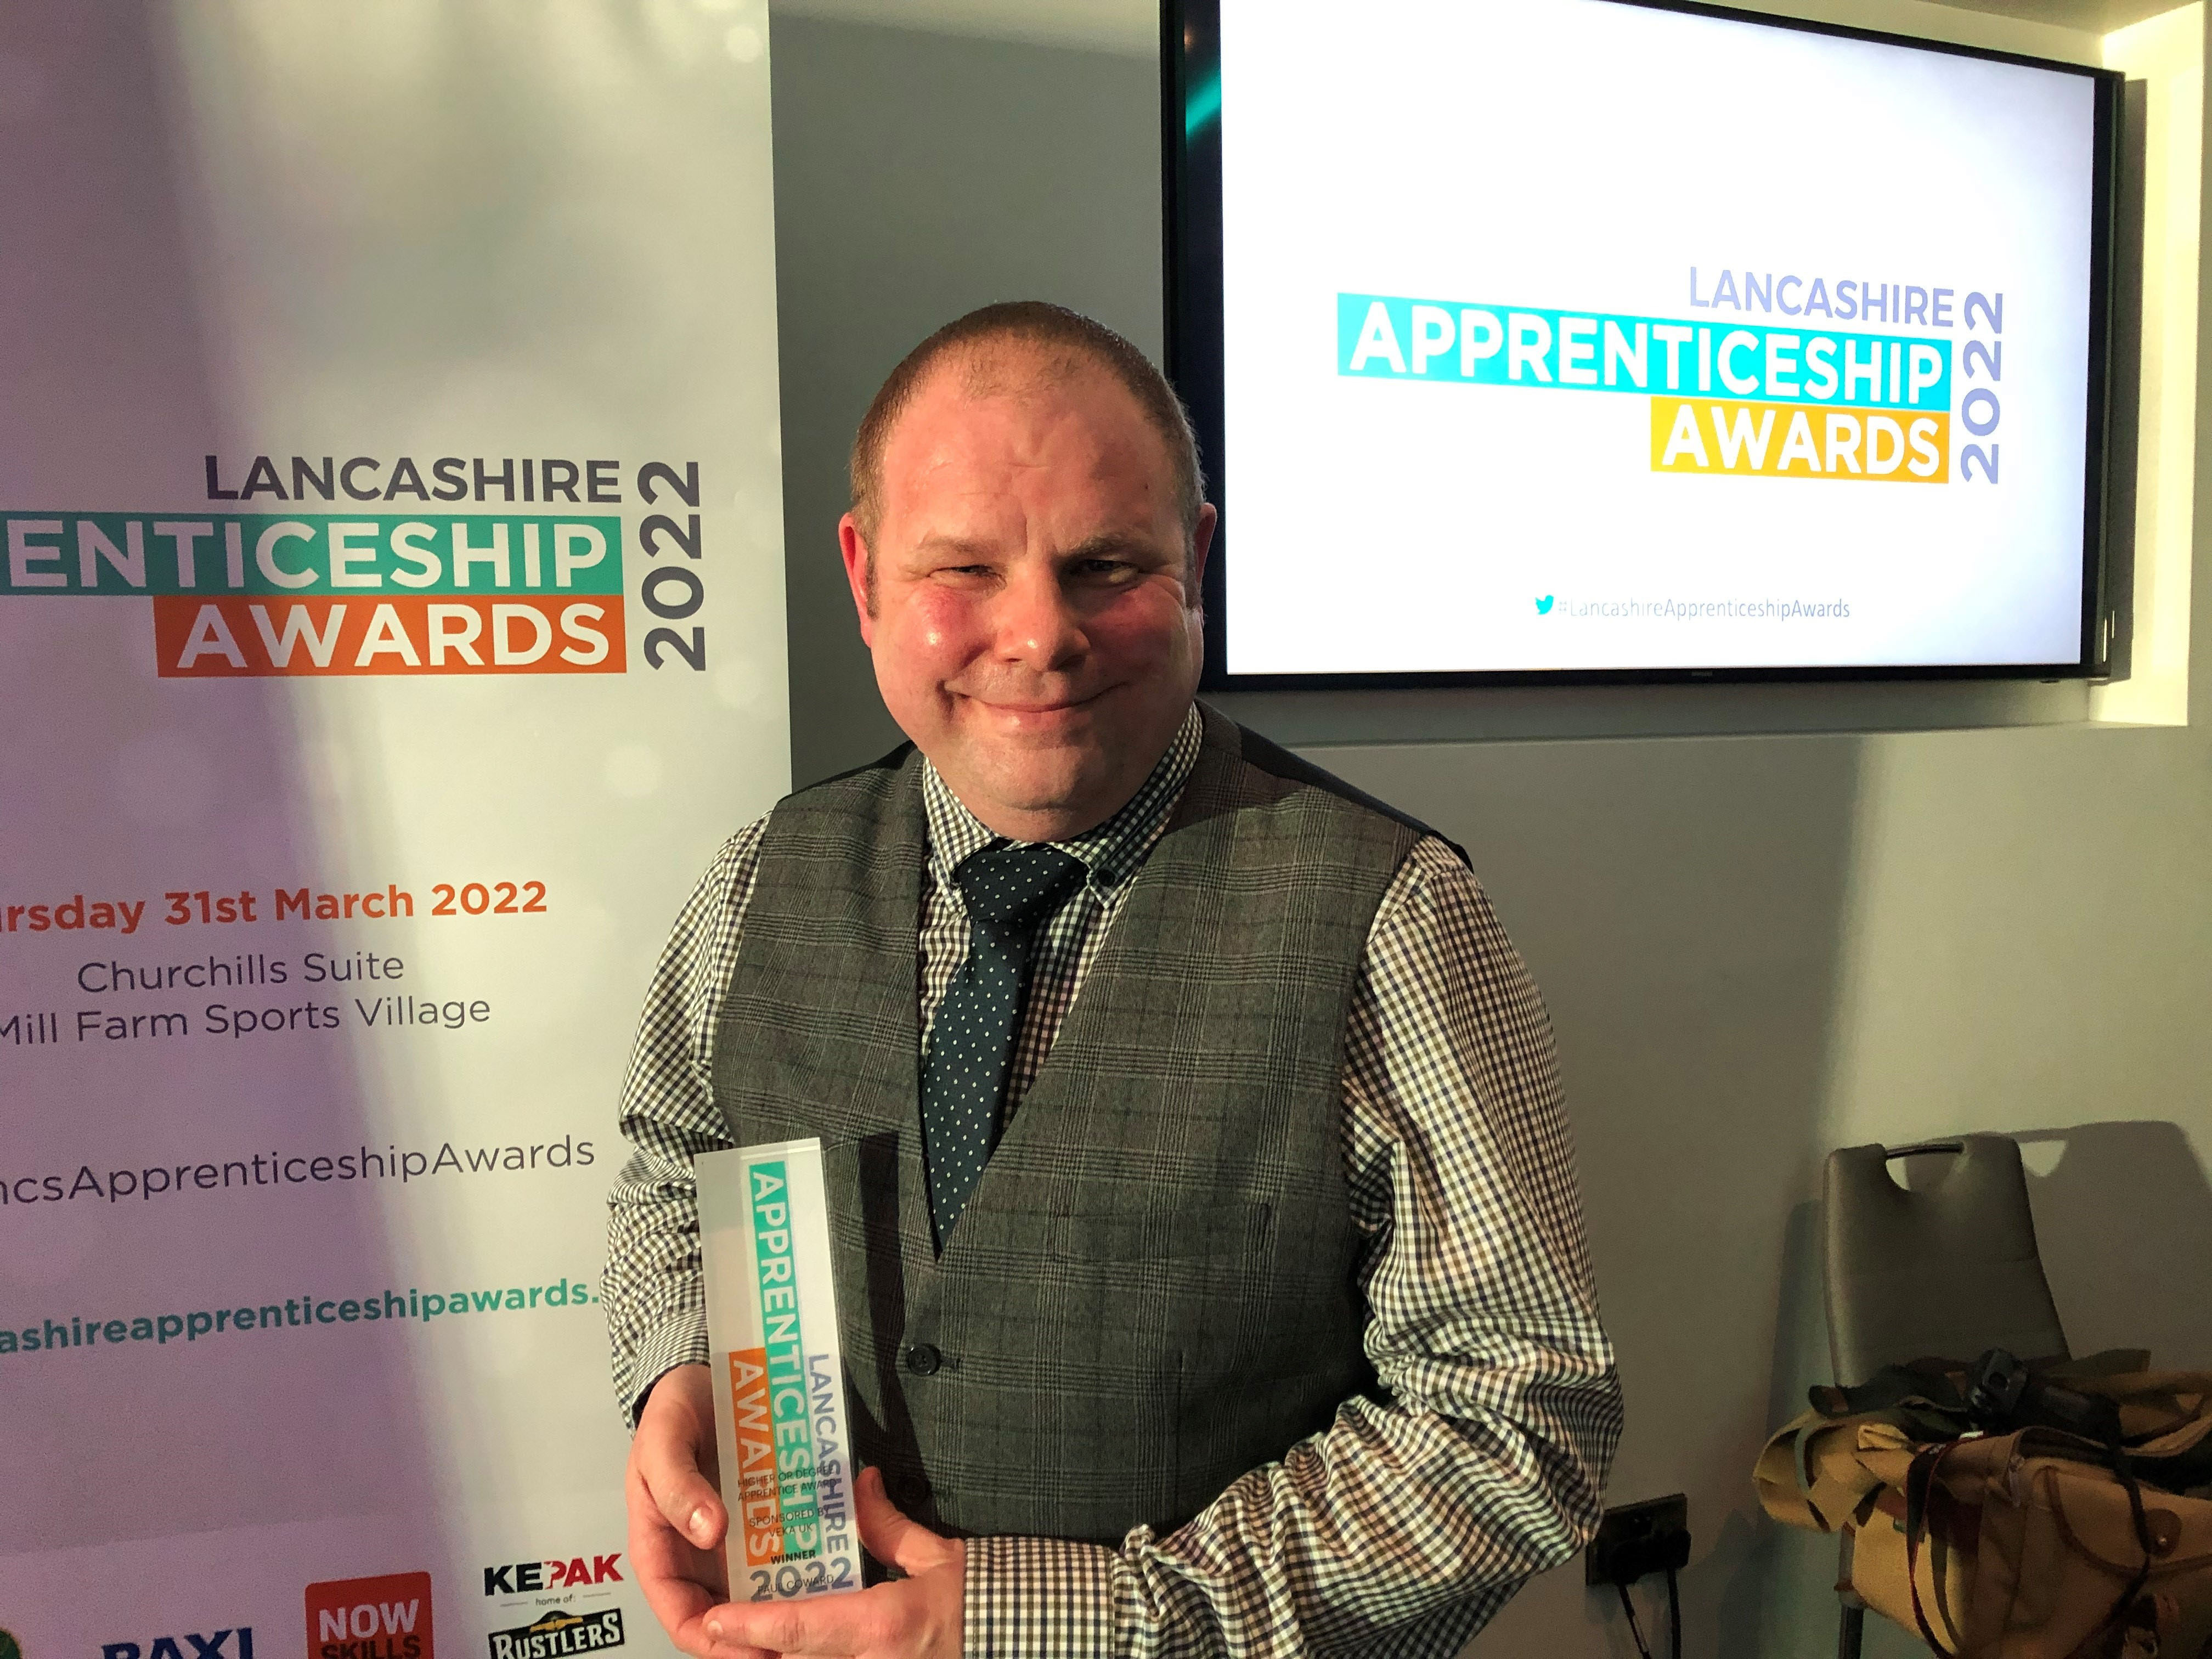 Health and Safety Officer at James Hall & Co. Ltd named a Lancashire Apprentice of the Year